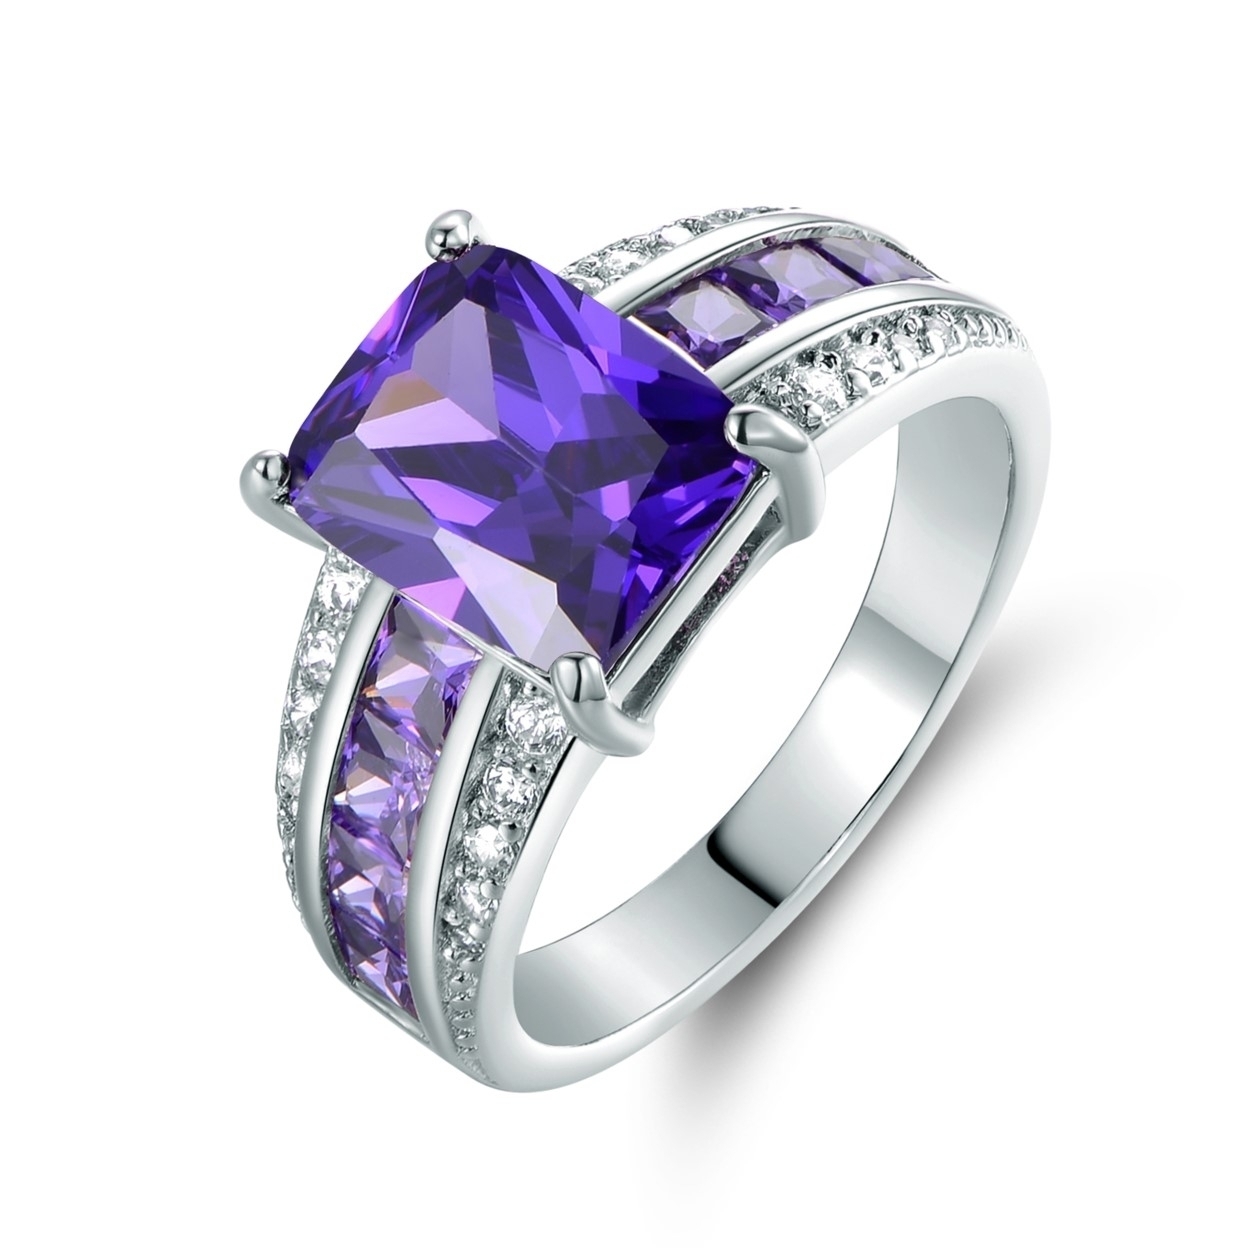 Princess Cut Amethyst Ring For Women – Refined 18K Gold-Plated Engagement Ring Adorned With Amethyst And Cubic Zirconia Stones - 9